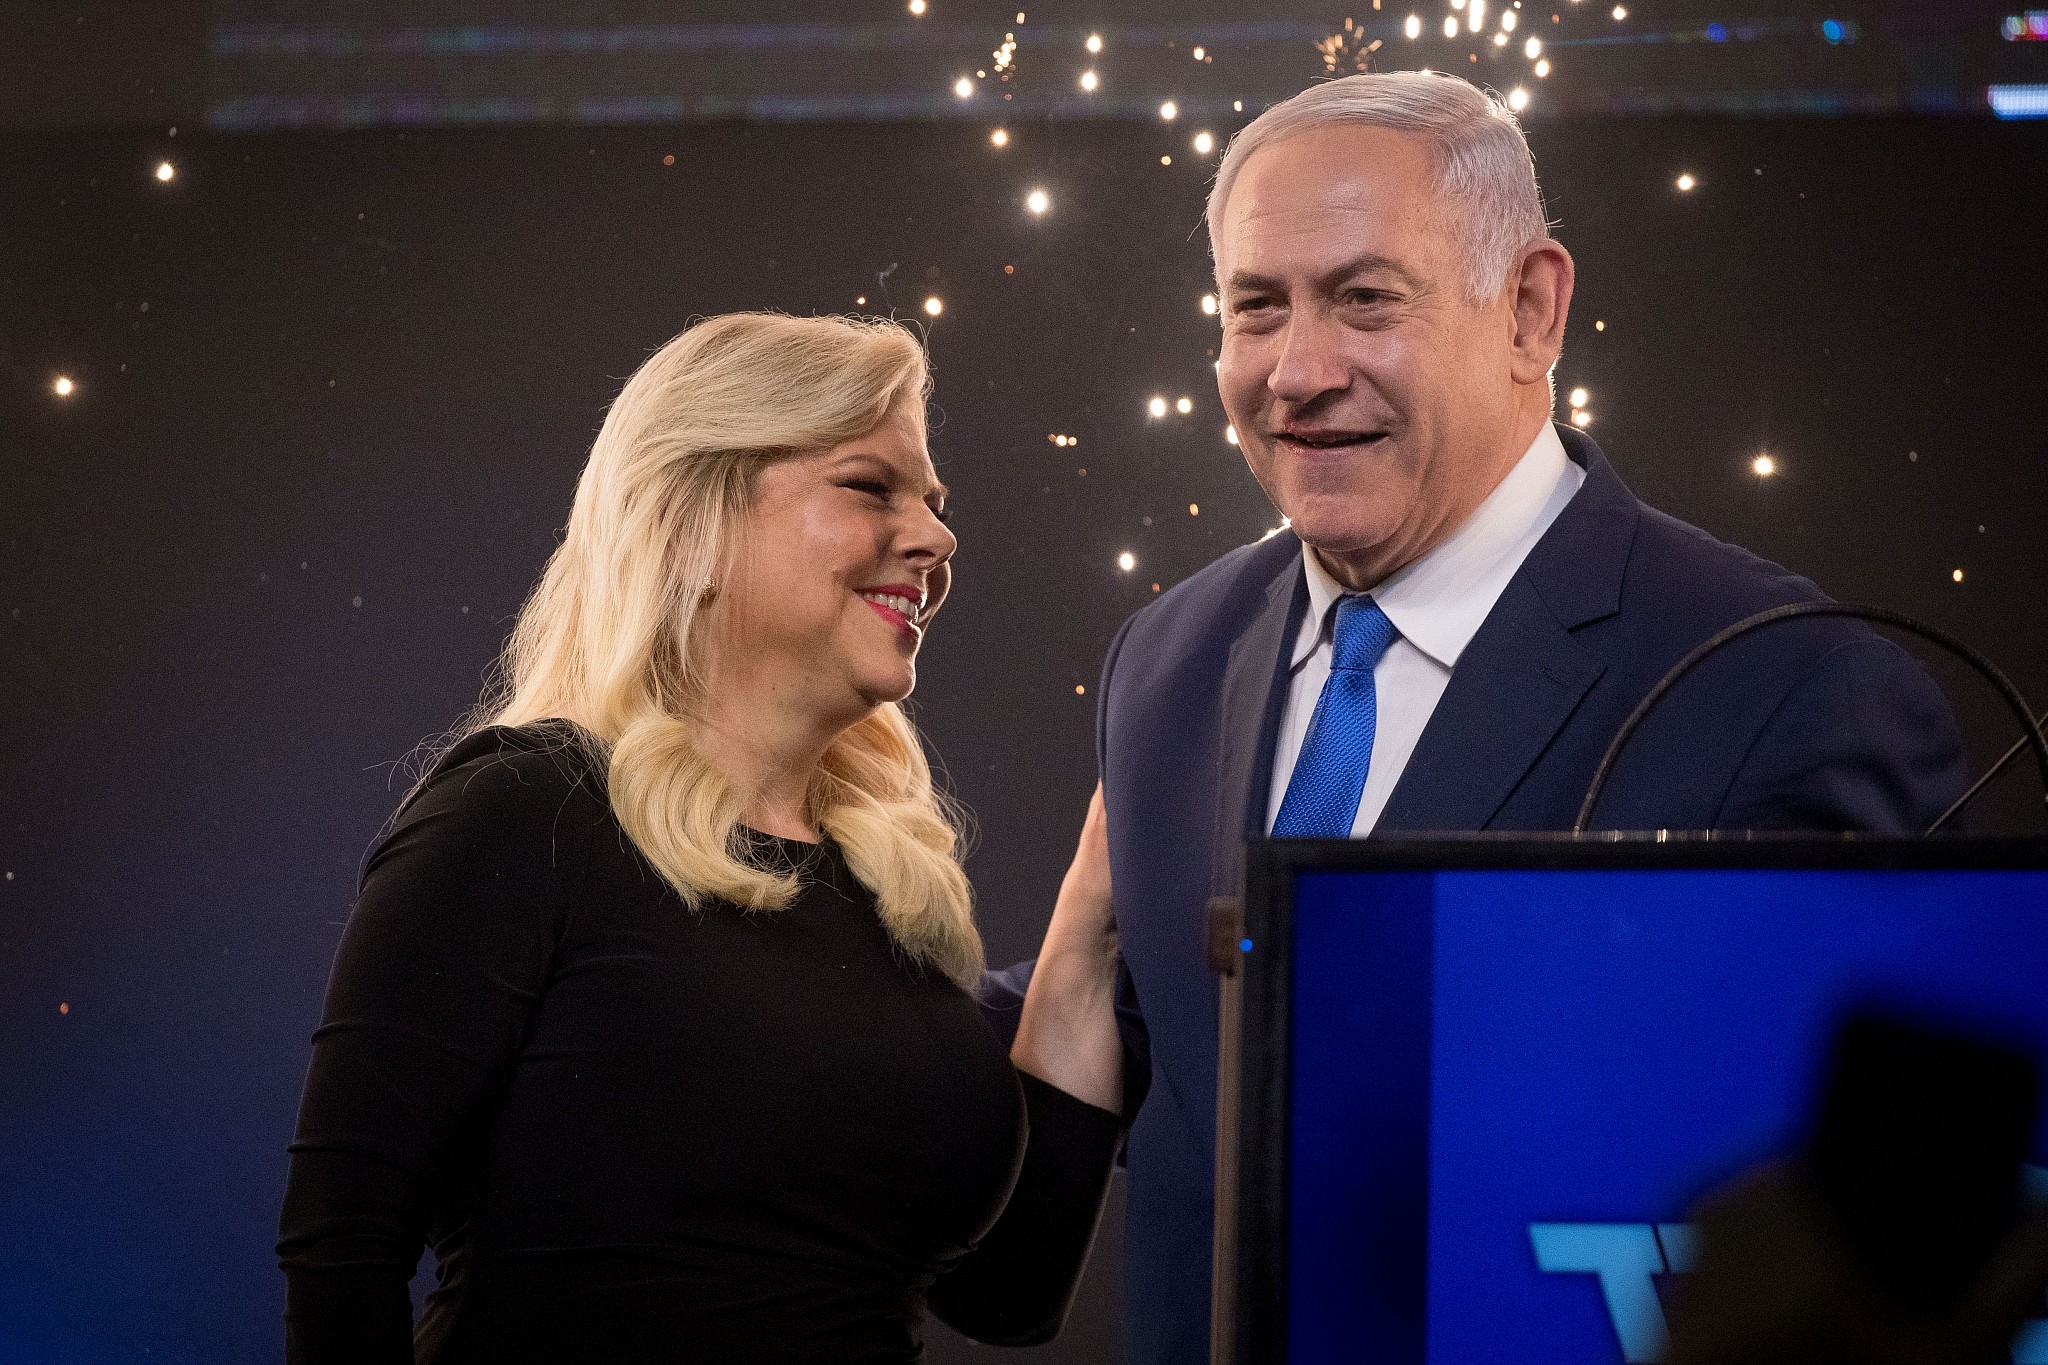 Netanyahu won, everyone else lost: 5 takeaways from the 2019 elections